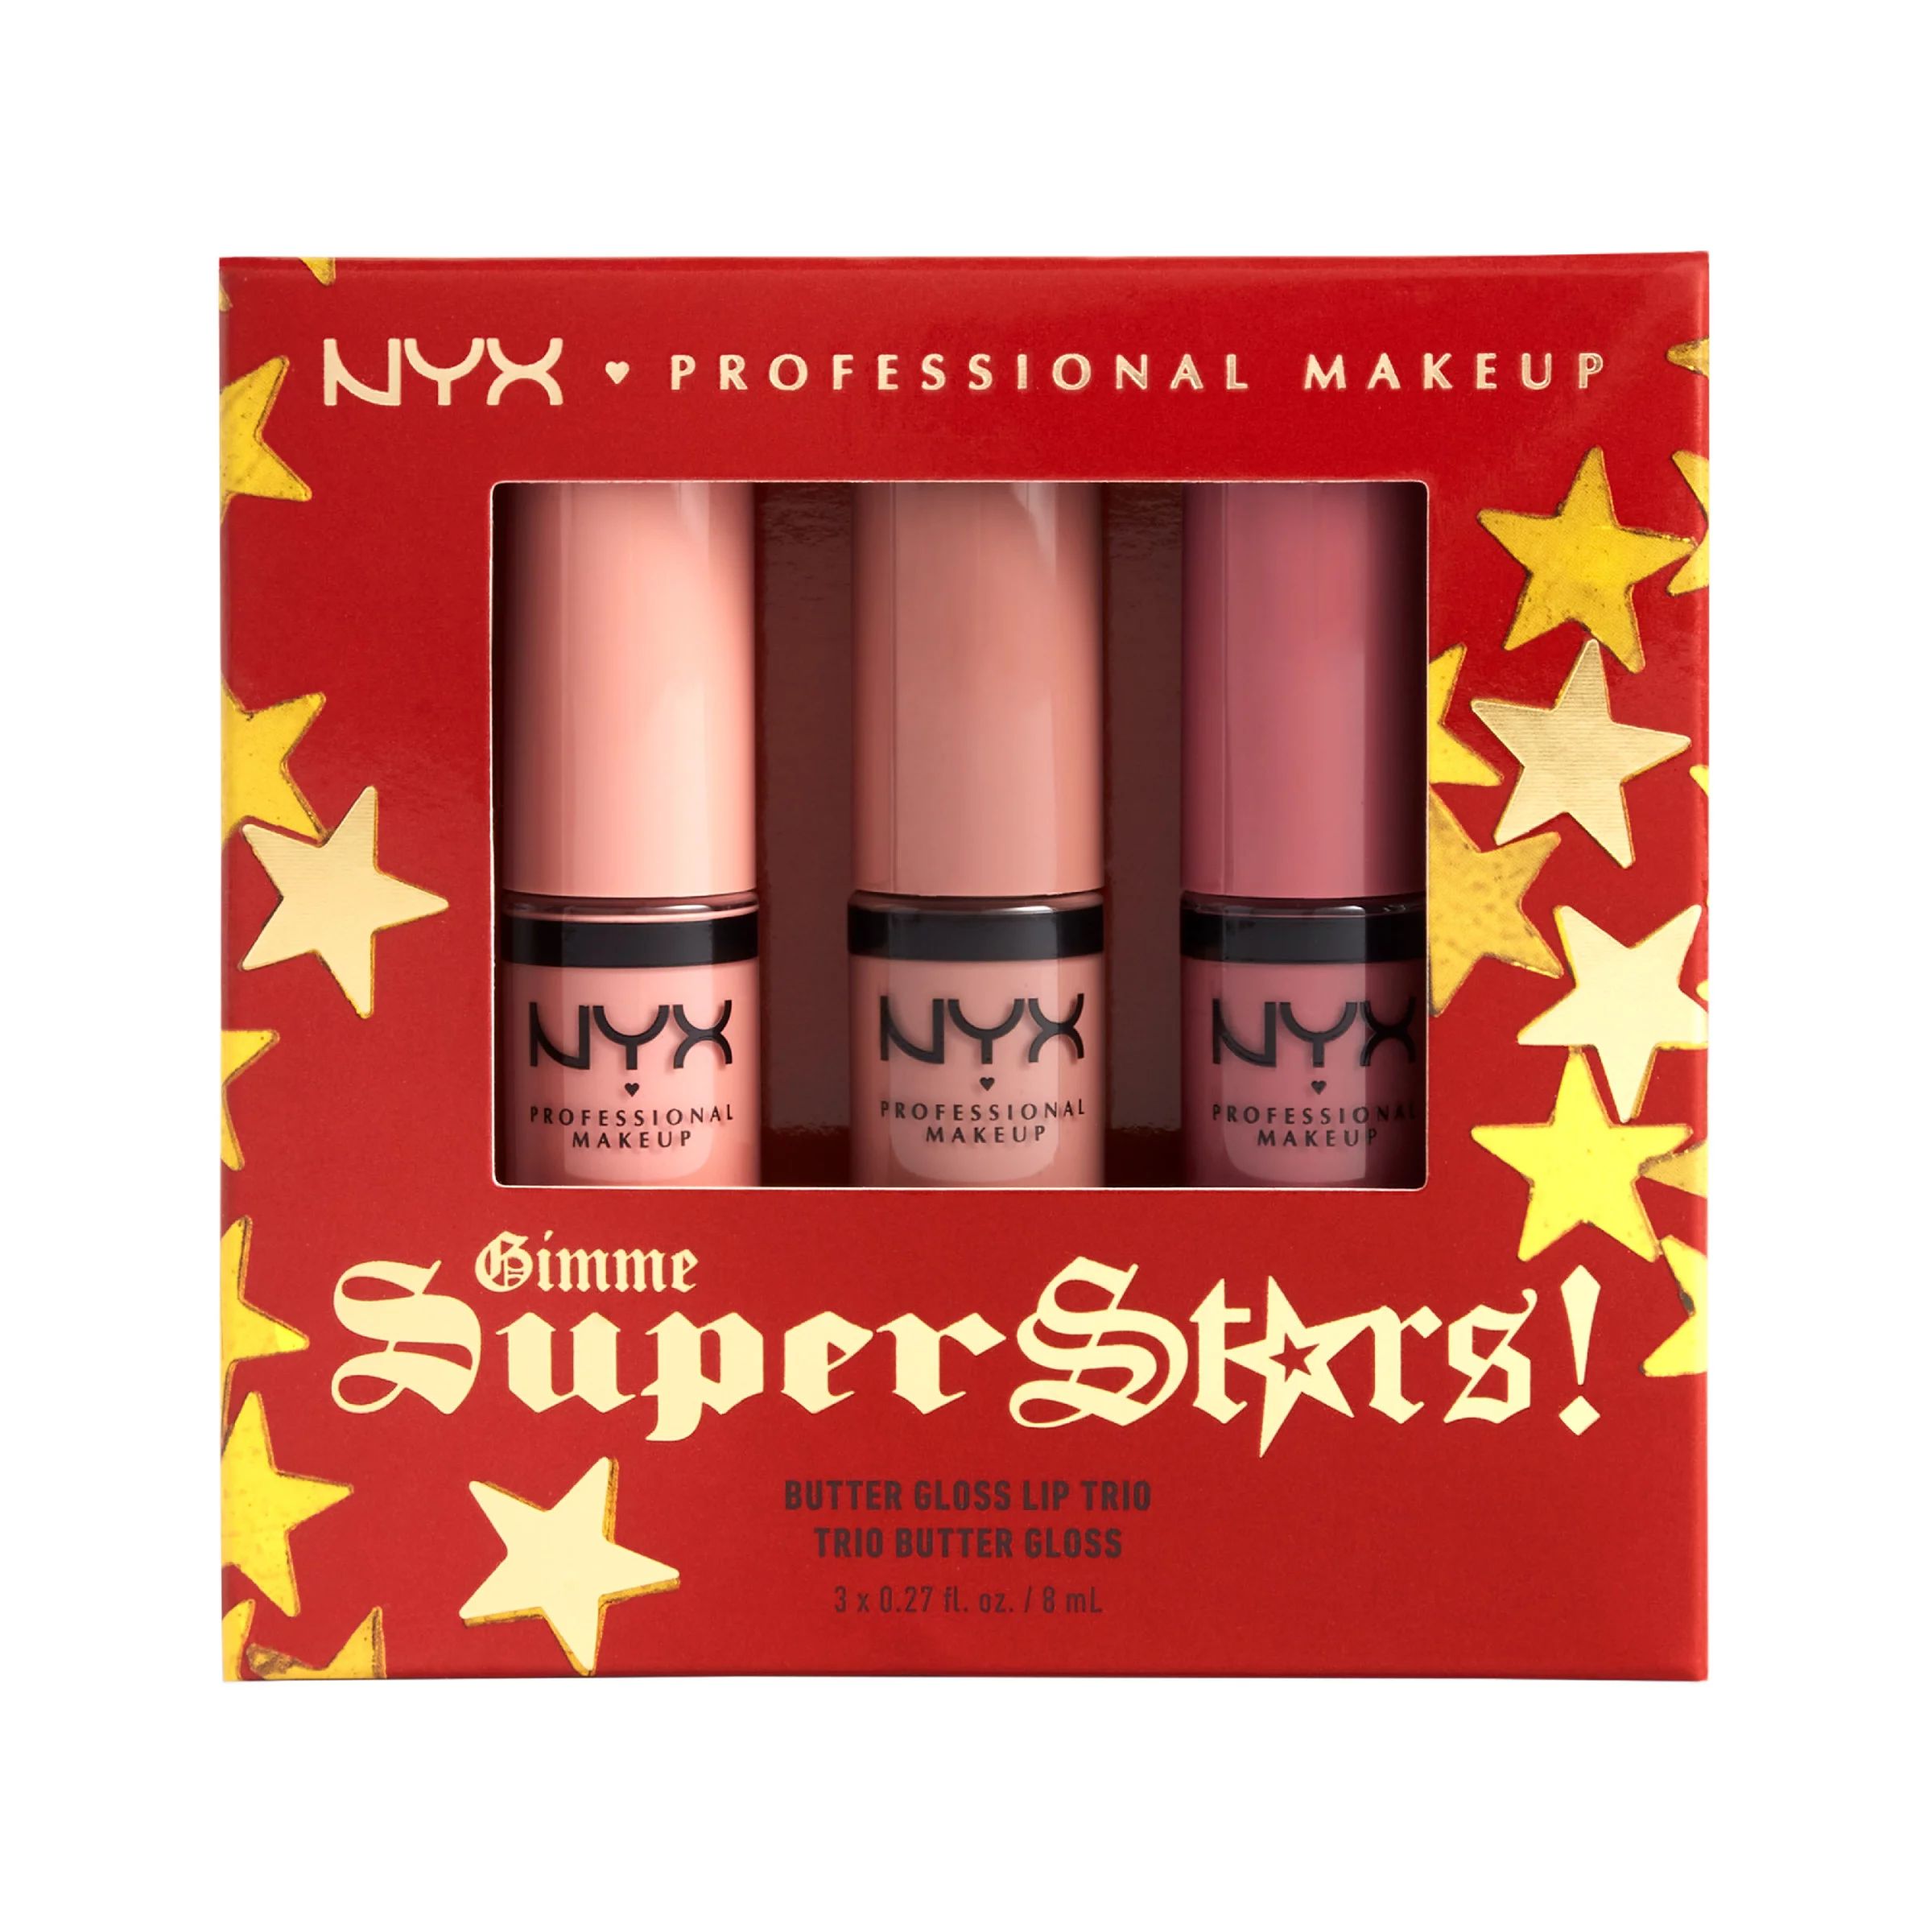 NYX Professional Makeup Butter Gloss Trio, Non-sticky Lip Gloss, Holiday Collection, Light Nudes | Walmart (US)